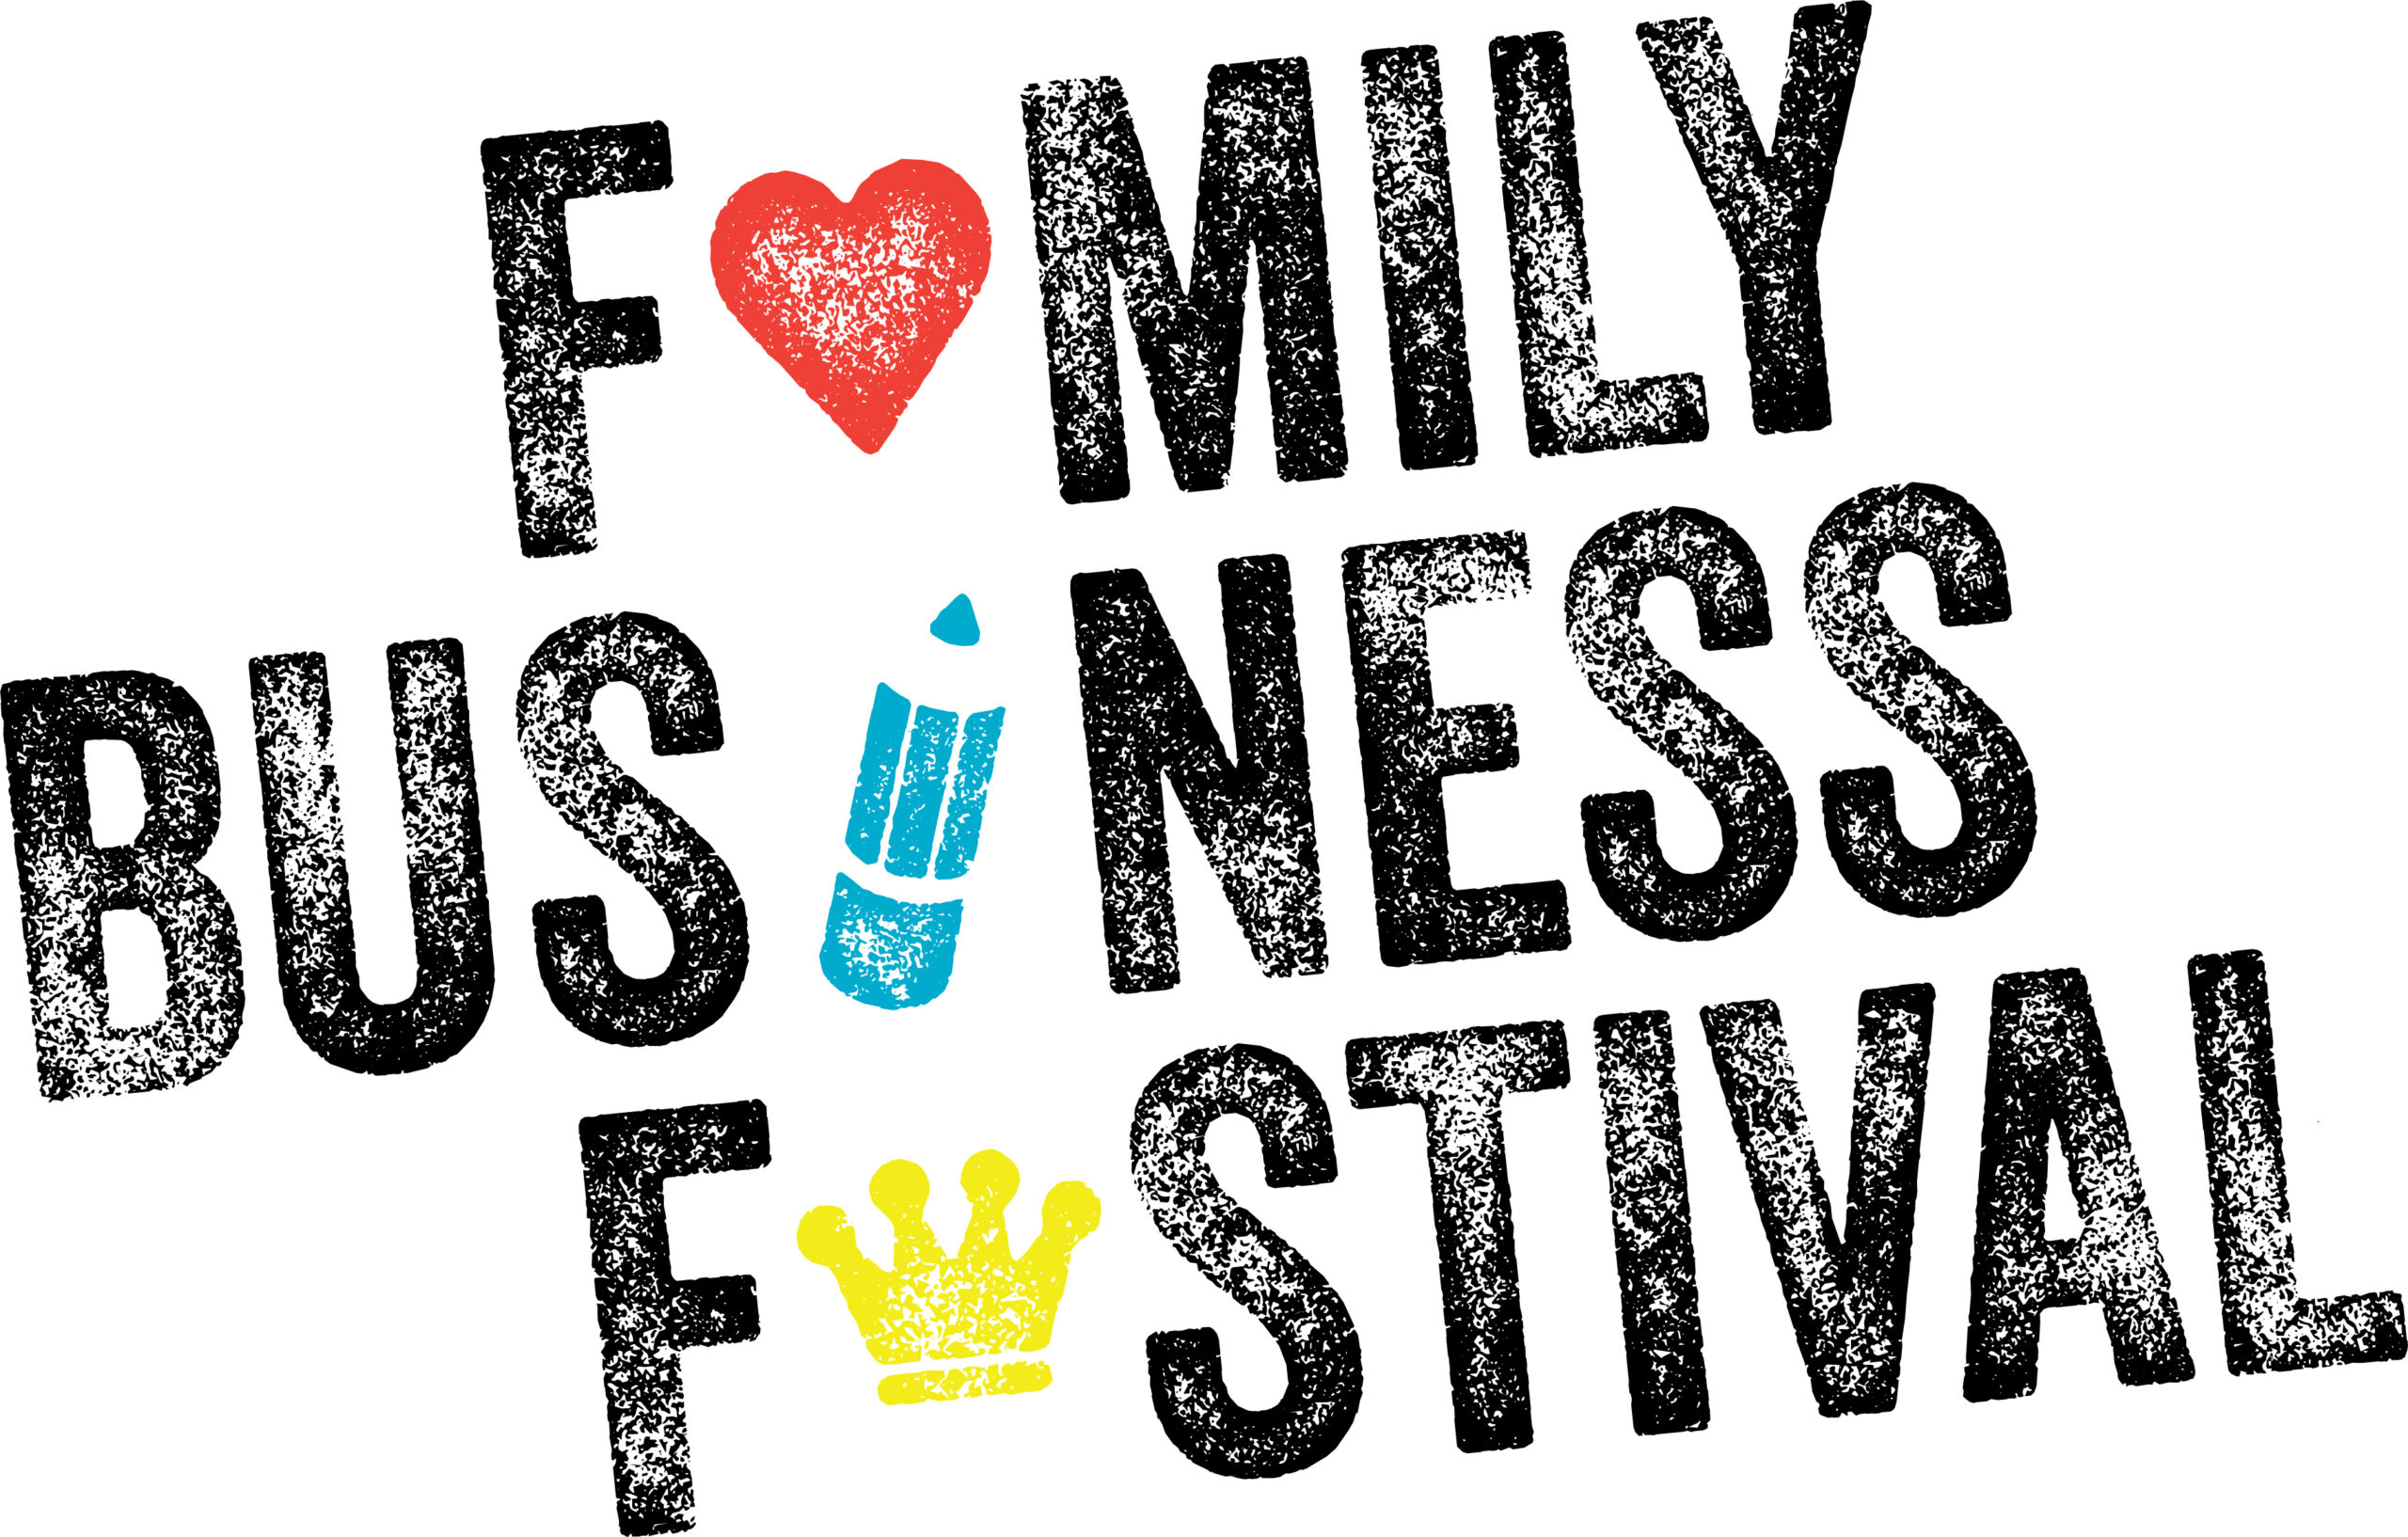 Introducing the Family Business Festival 2022